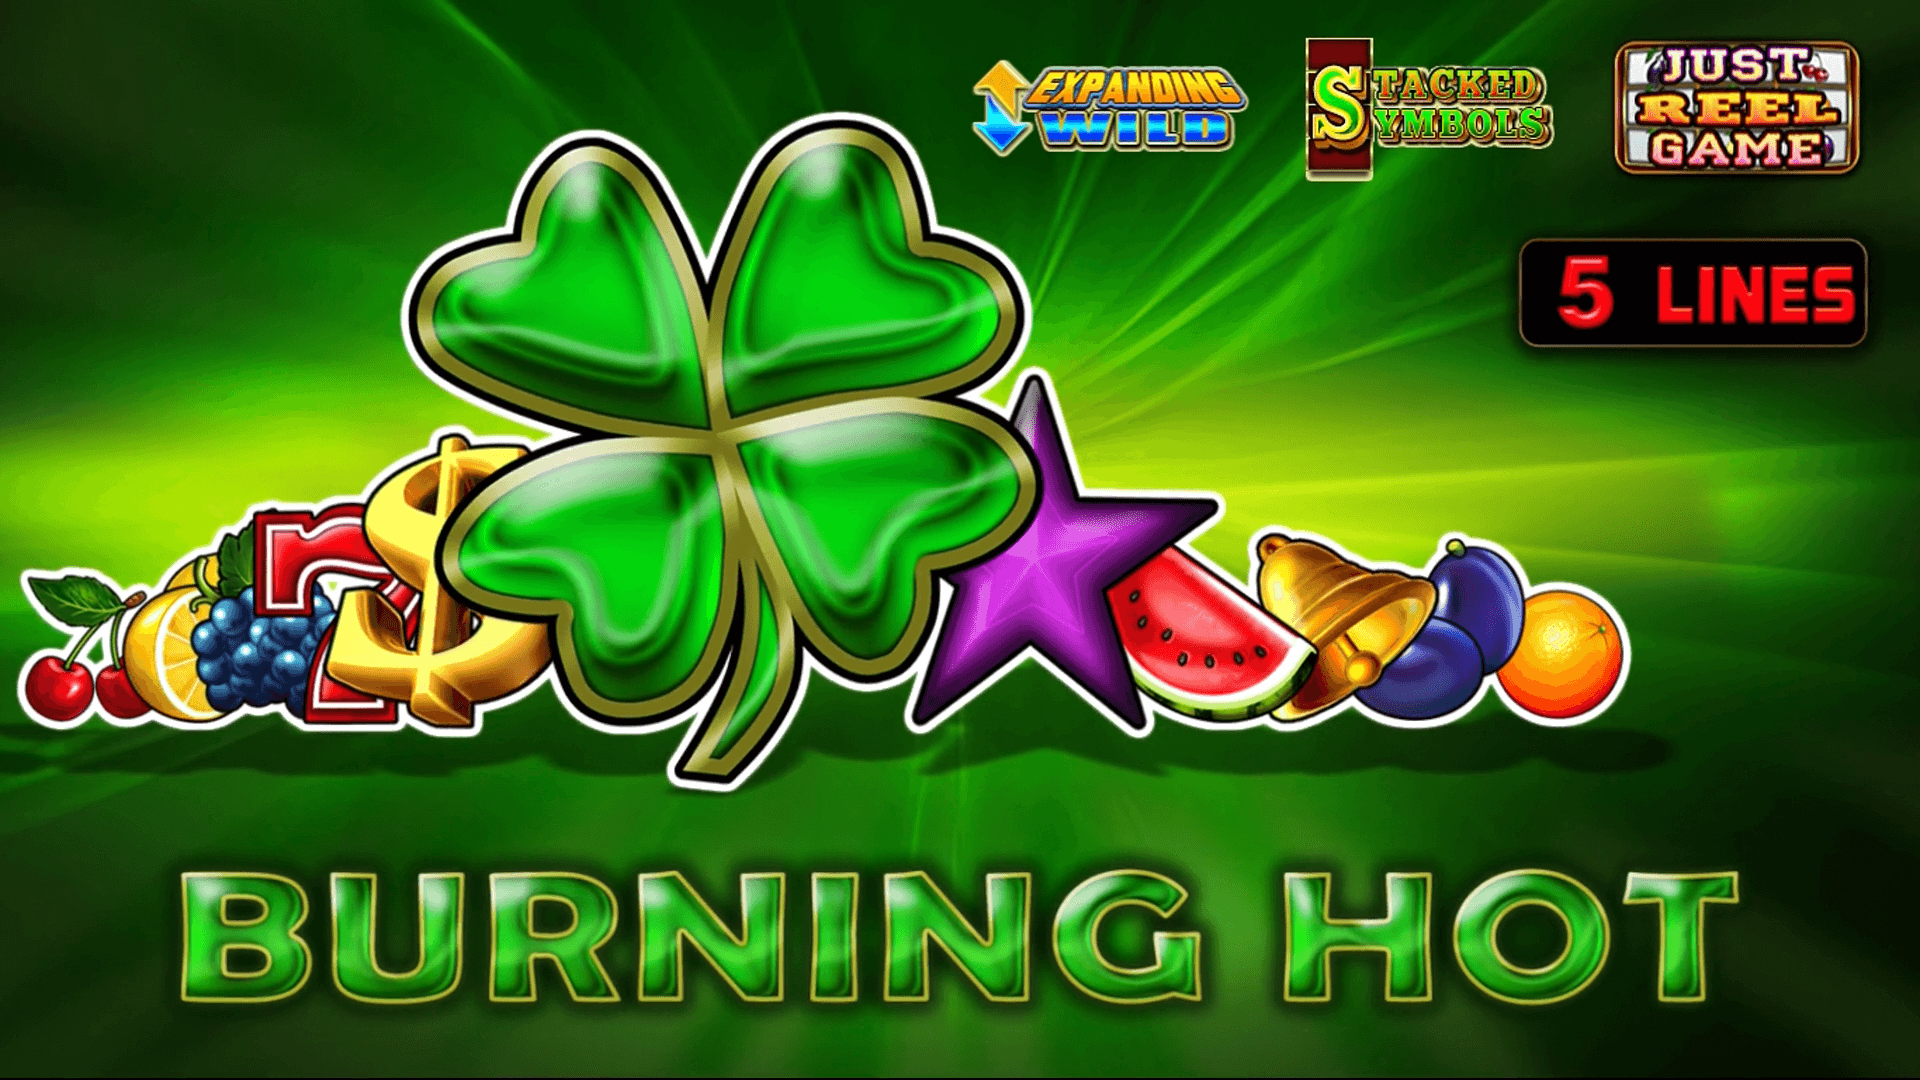 egt games collection series fruits collection 2 burning hot